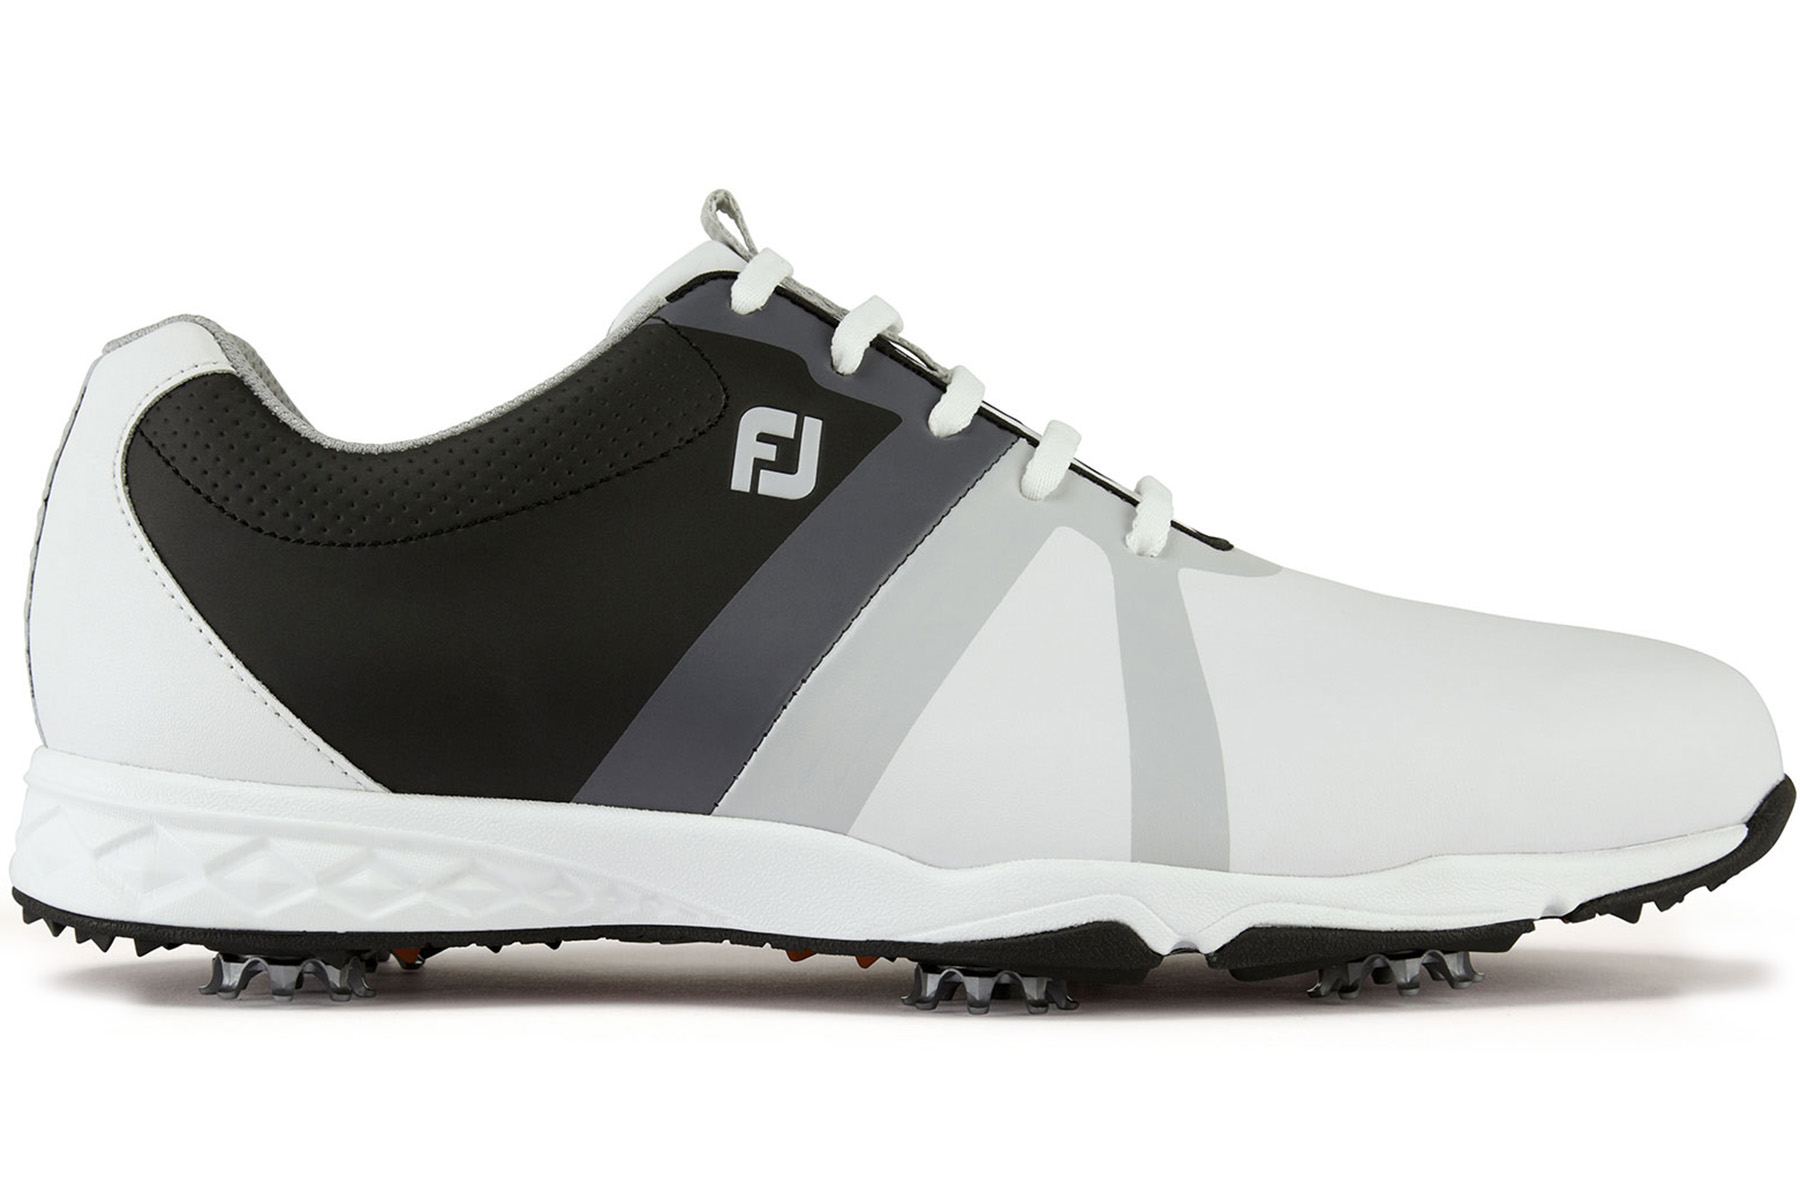 FootJoy Energize Shoes from american golf